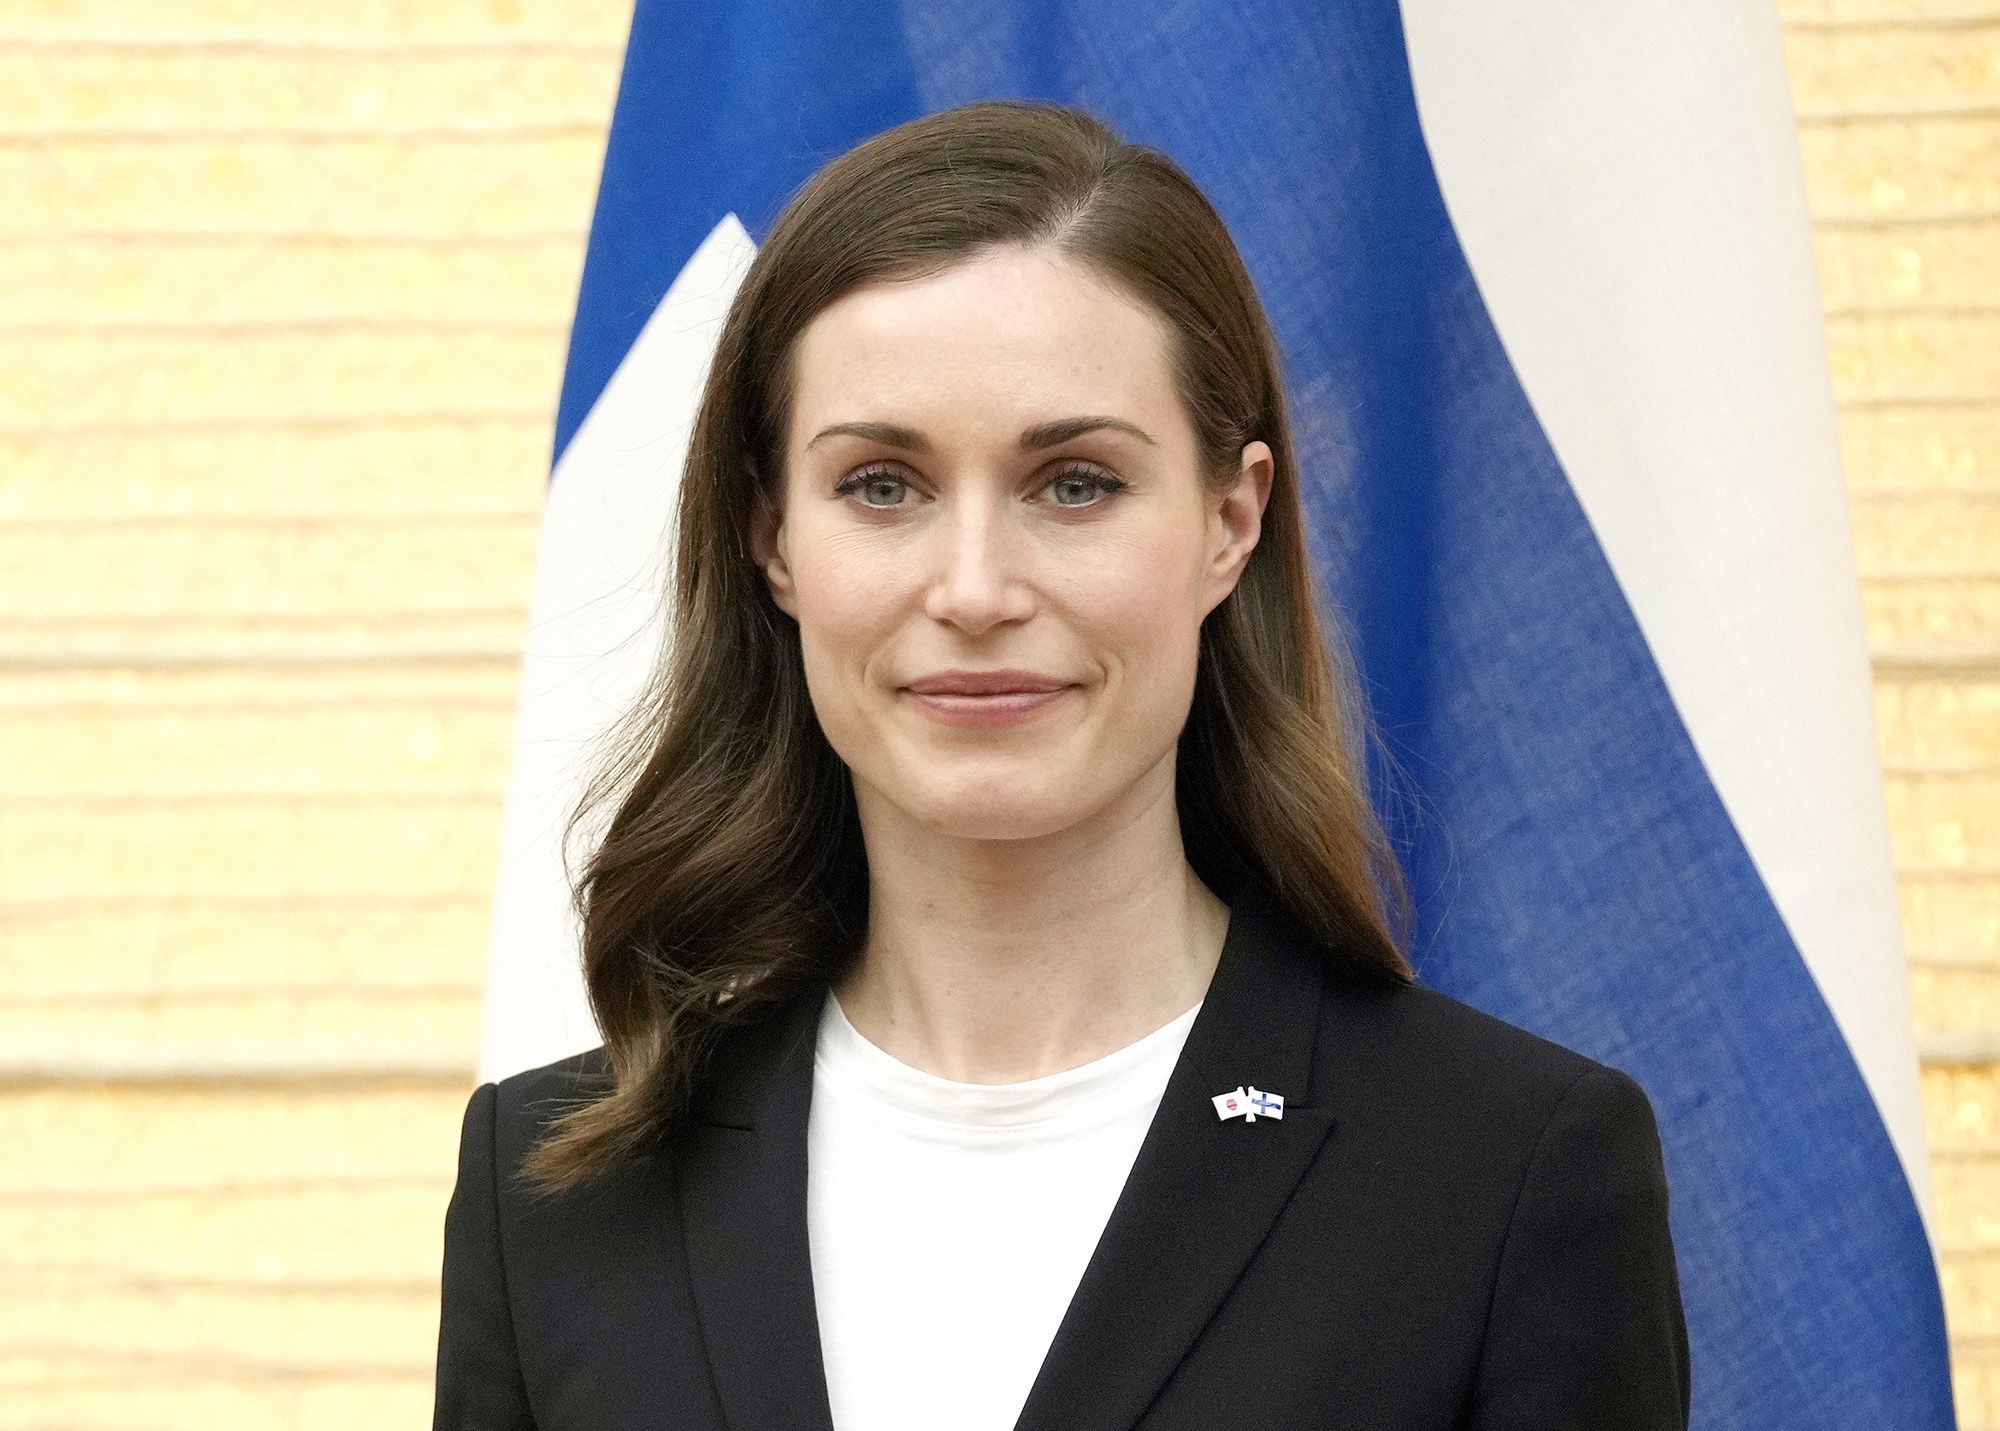 Finnish Prime Minister Sanna Marin and husband file for divorce